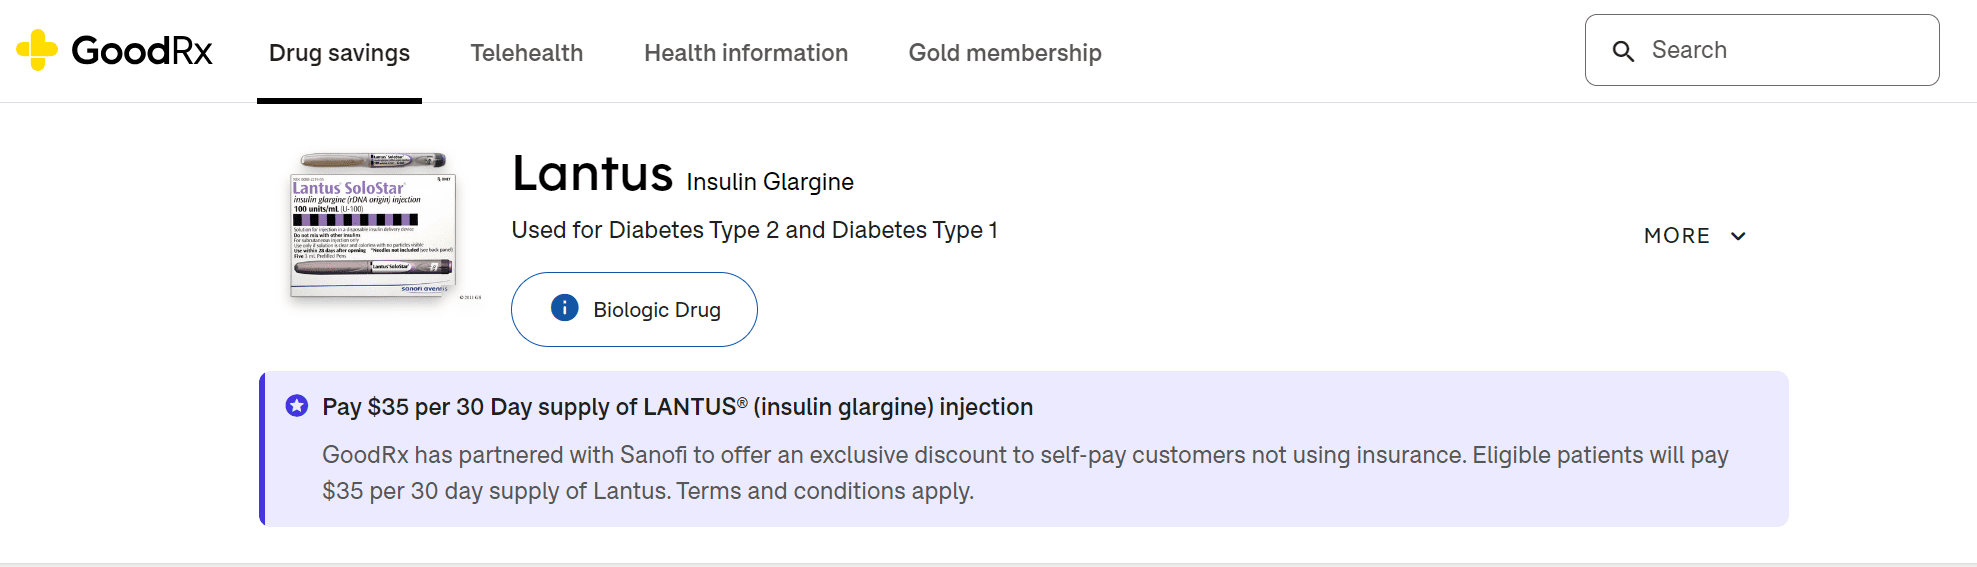 GoodRx Now Offers Access to $35 Insulin to All Americans